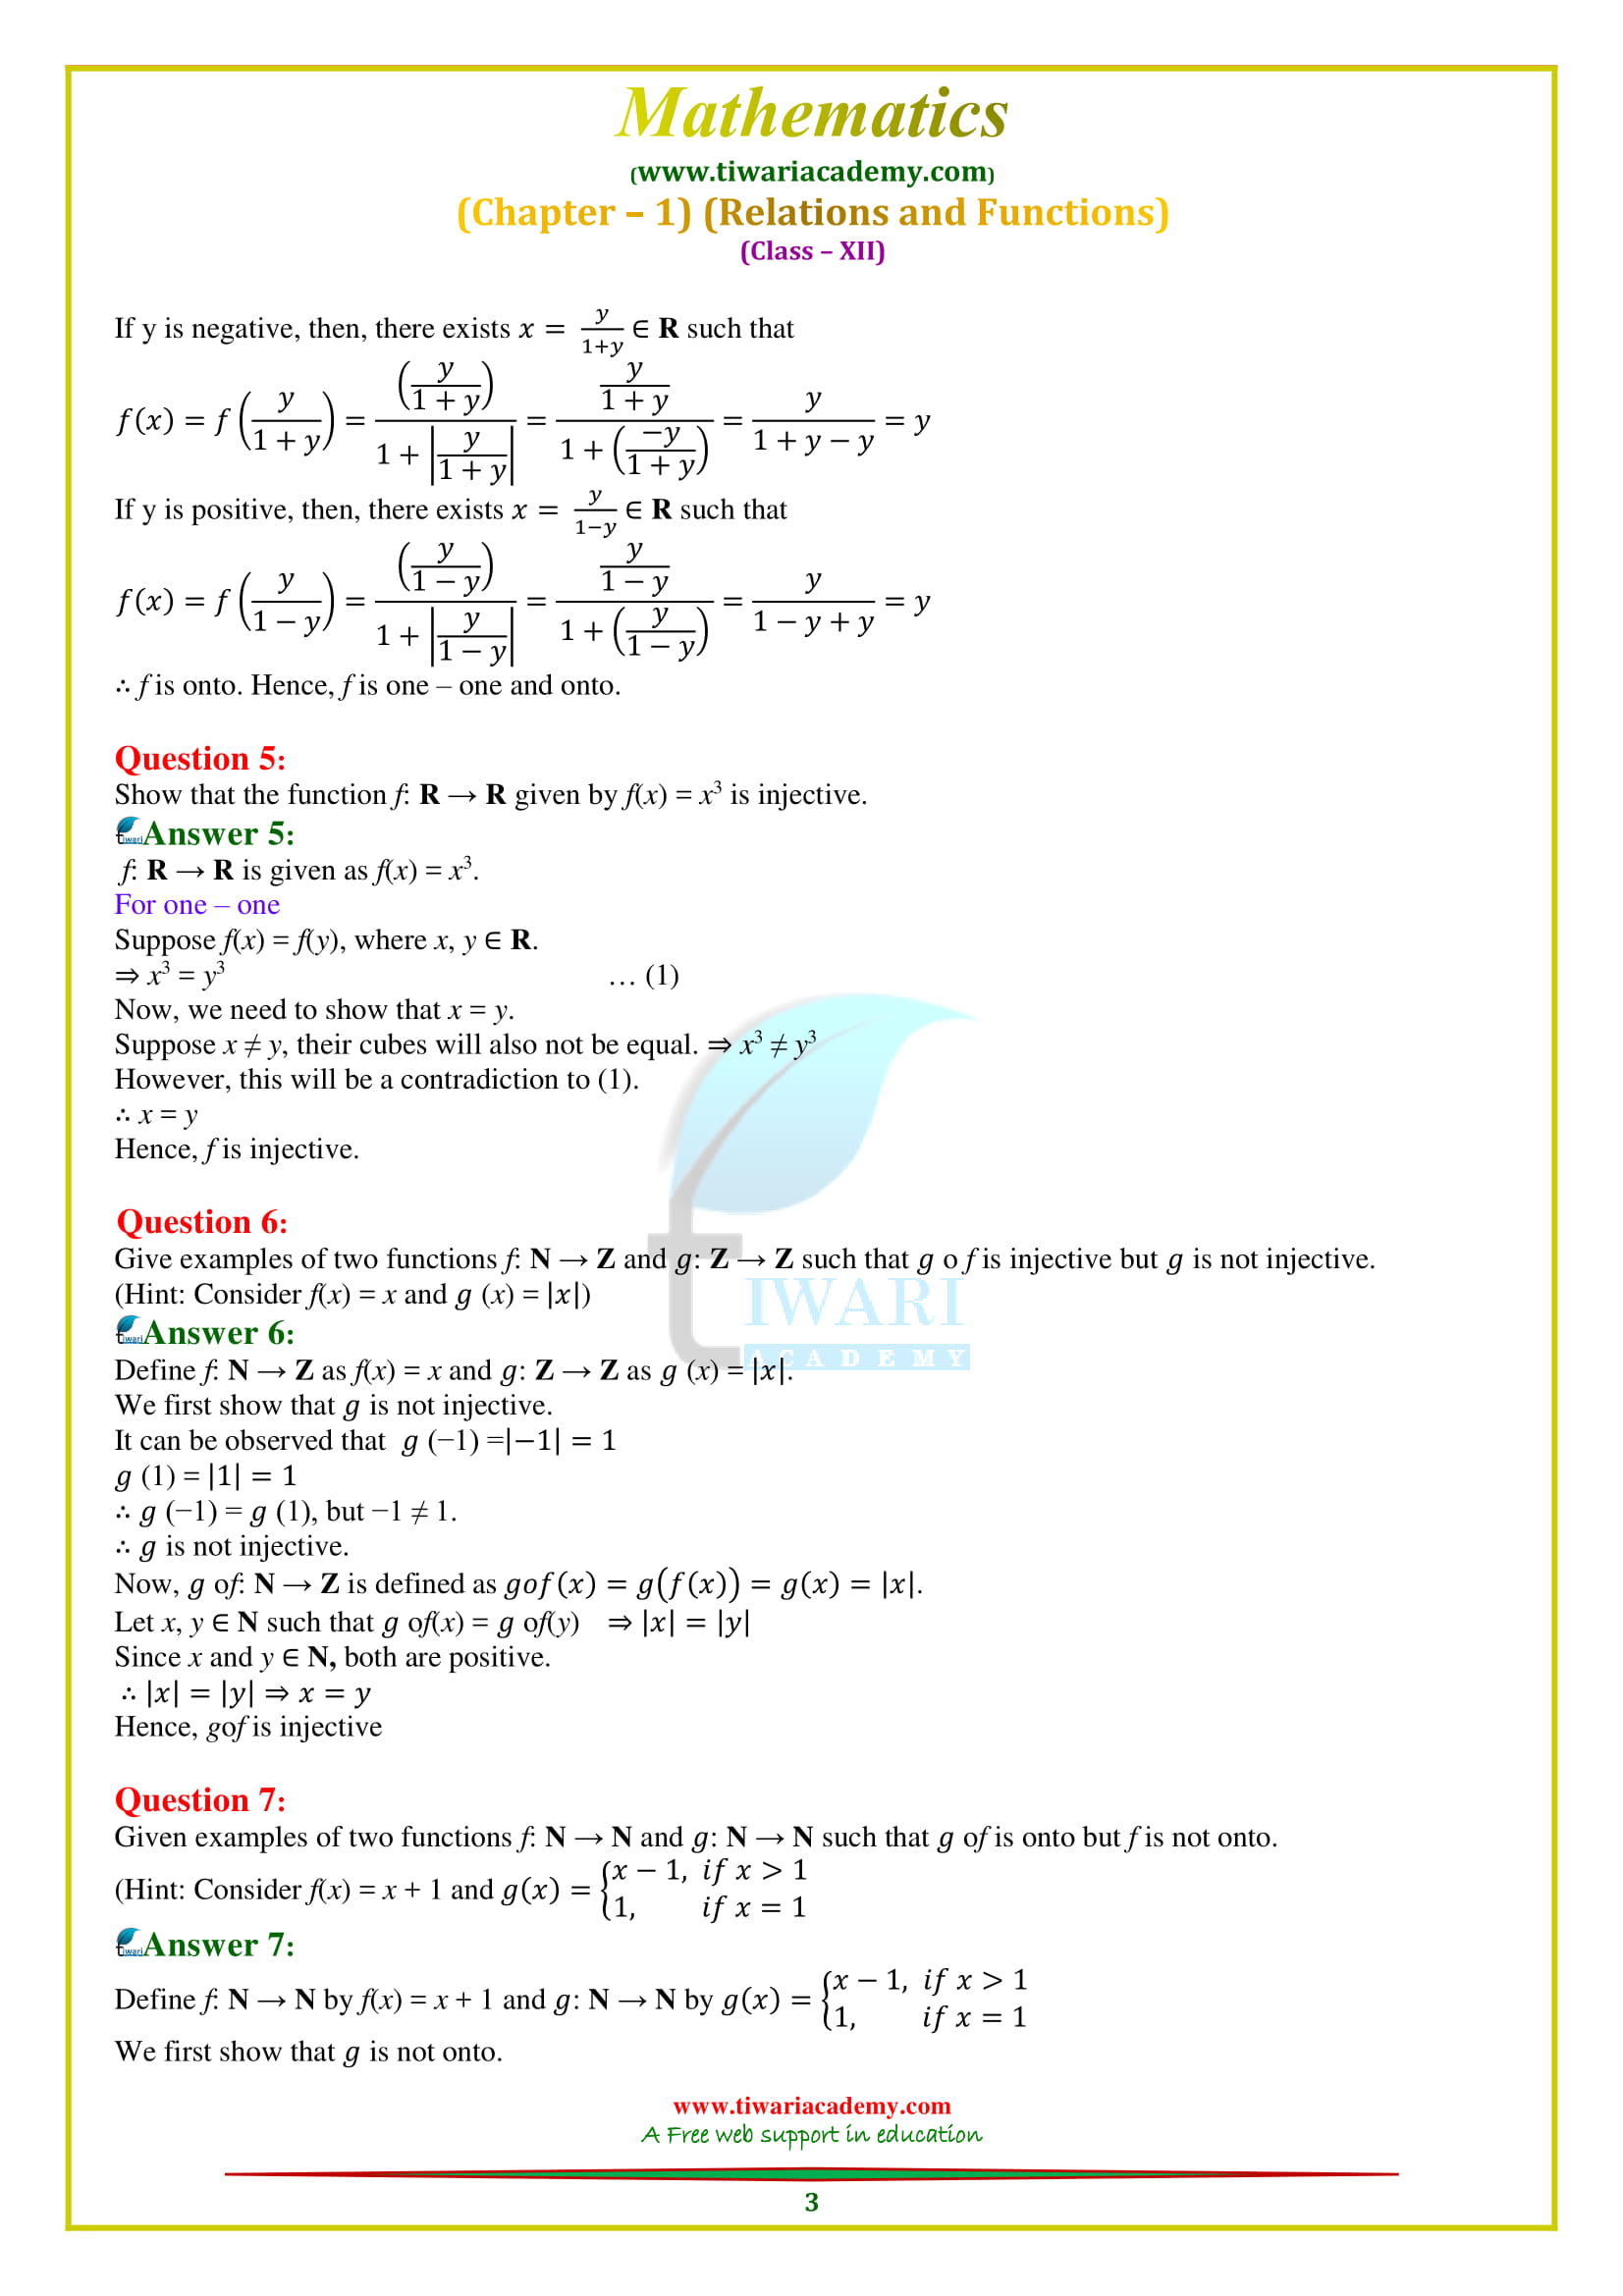 12 Maths Chapter 1 Miscellaneous Exercise solutions updated for 2018-2019.